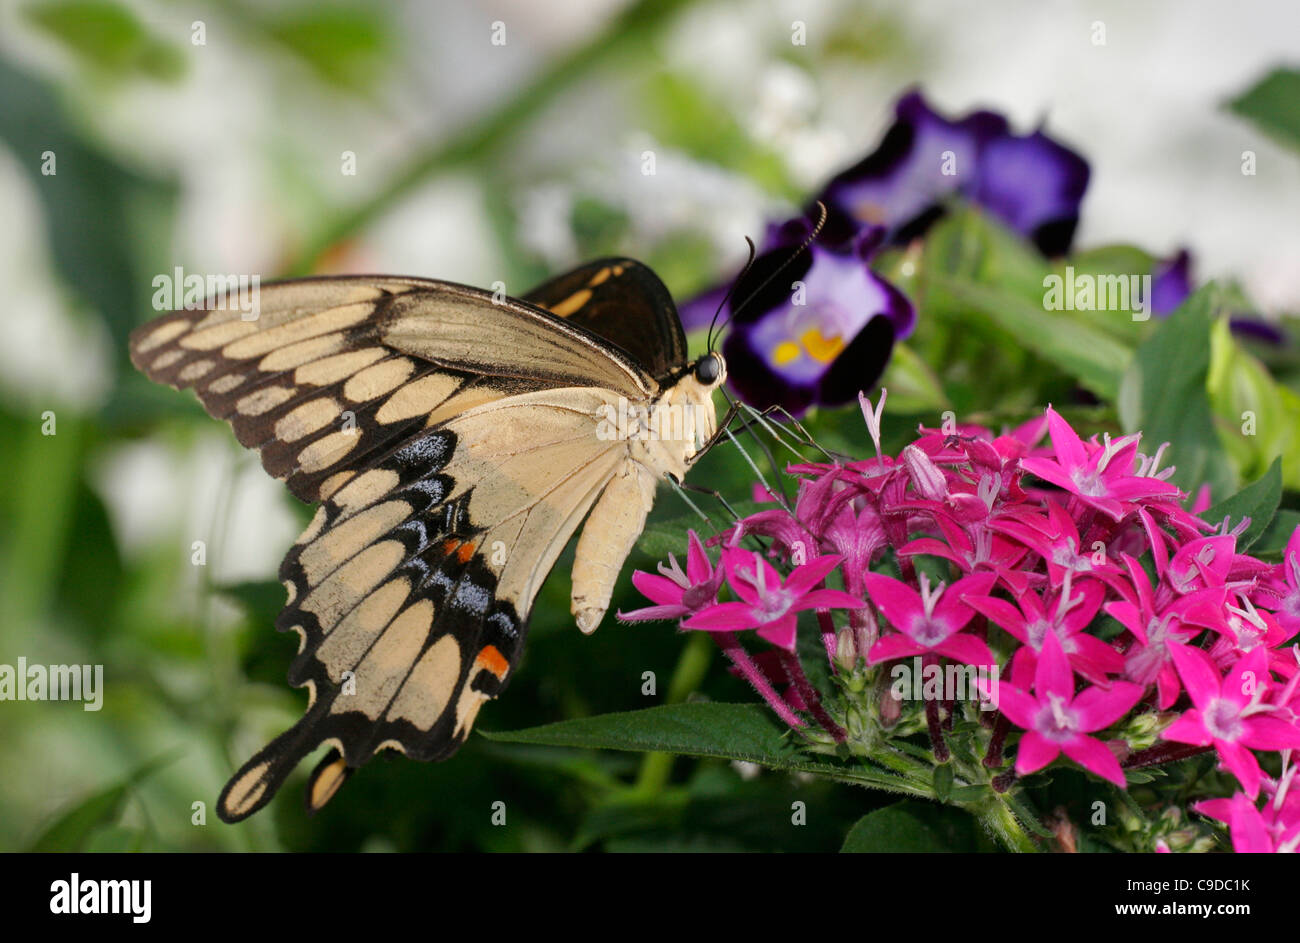 Close-up of a Giant Swallowtail Butterfly on flowers pollinating (Papilio cresphontes) Stock Photo